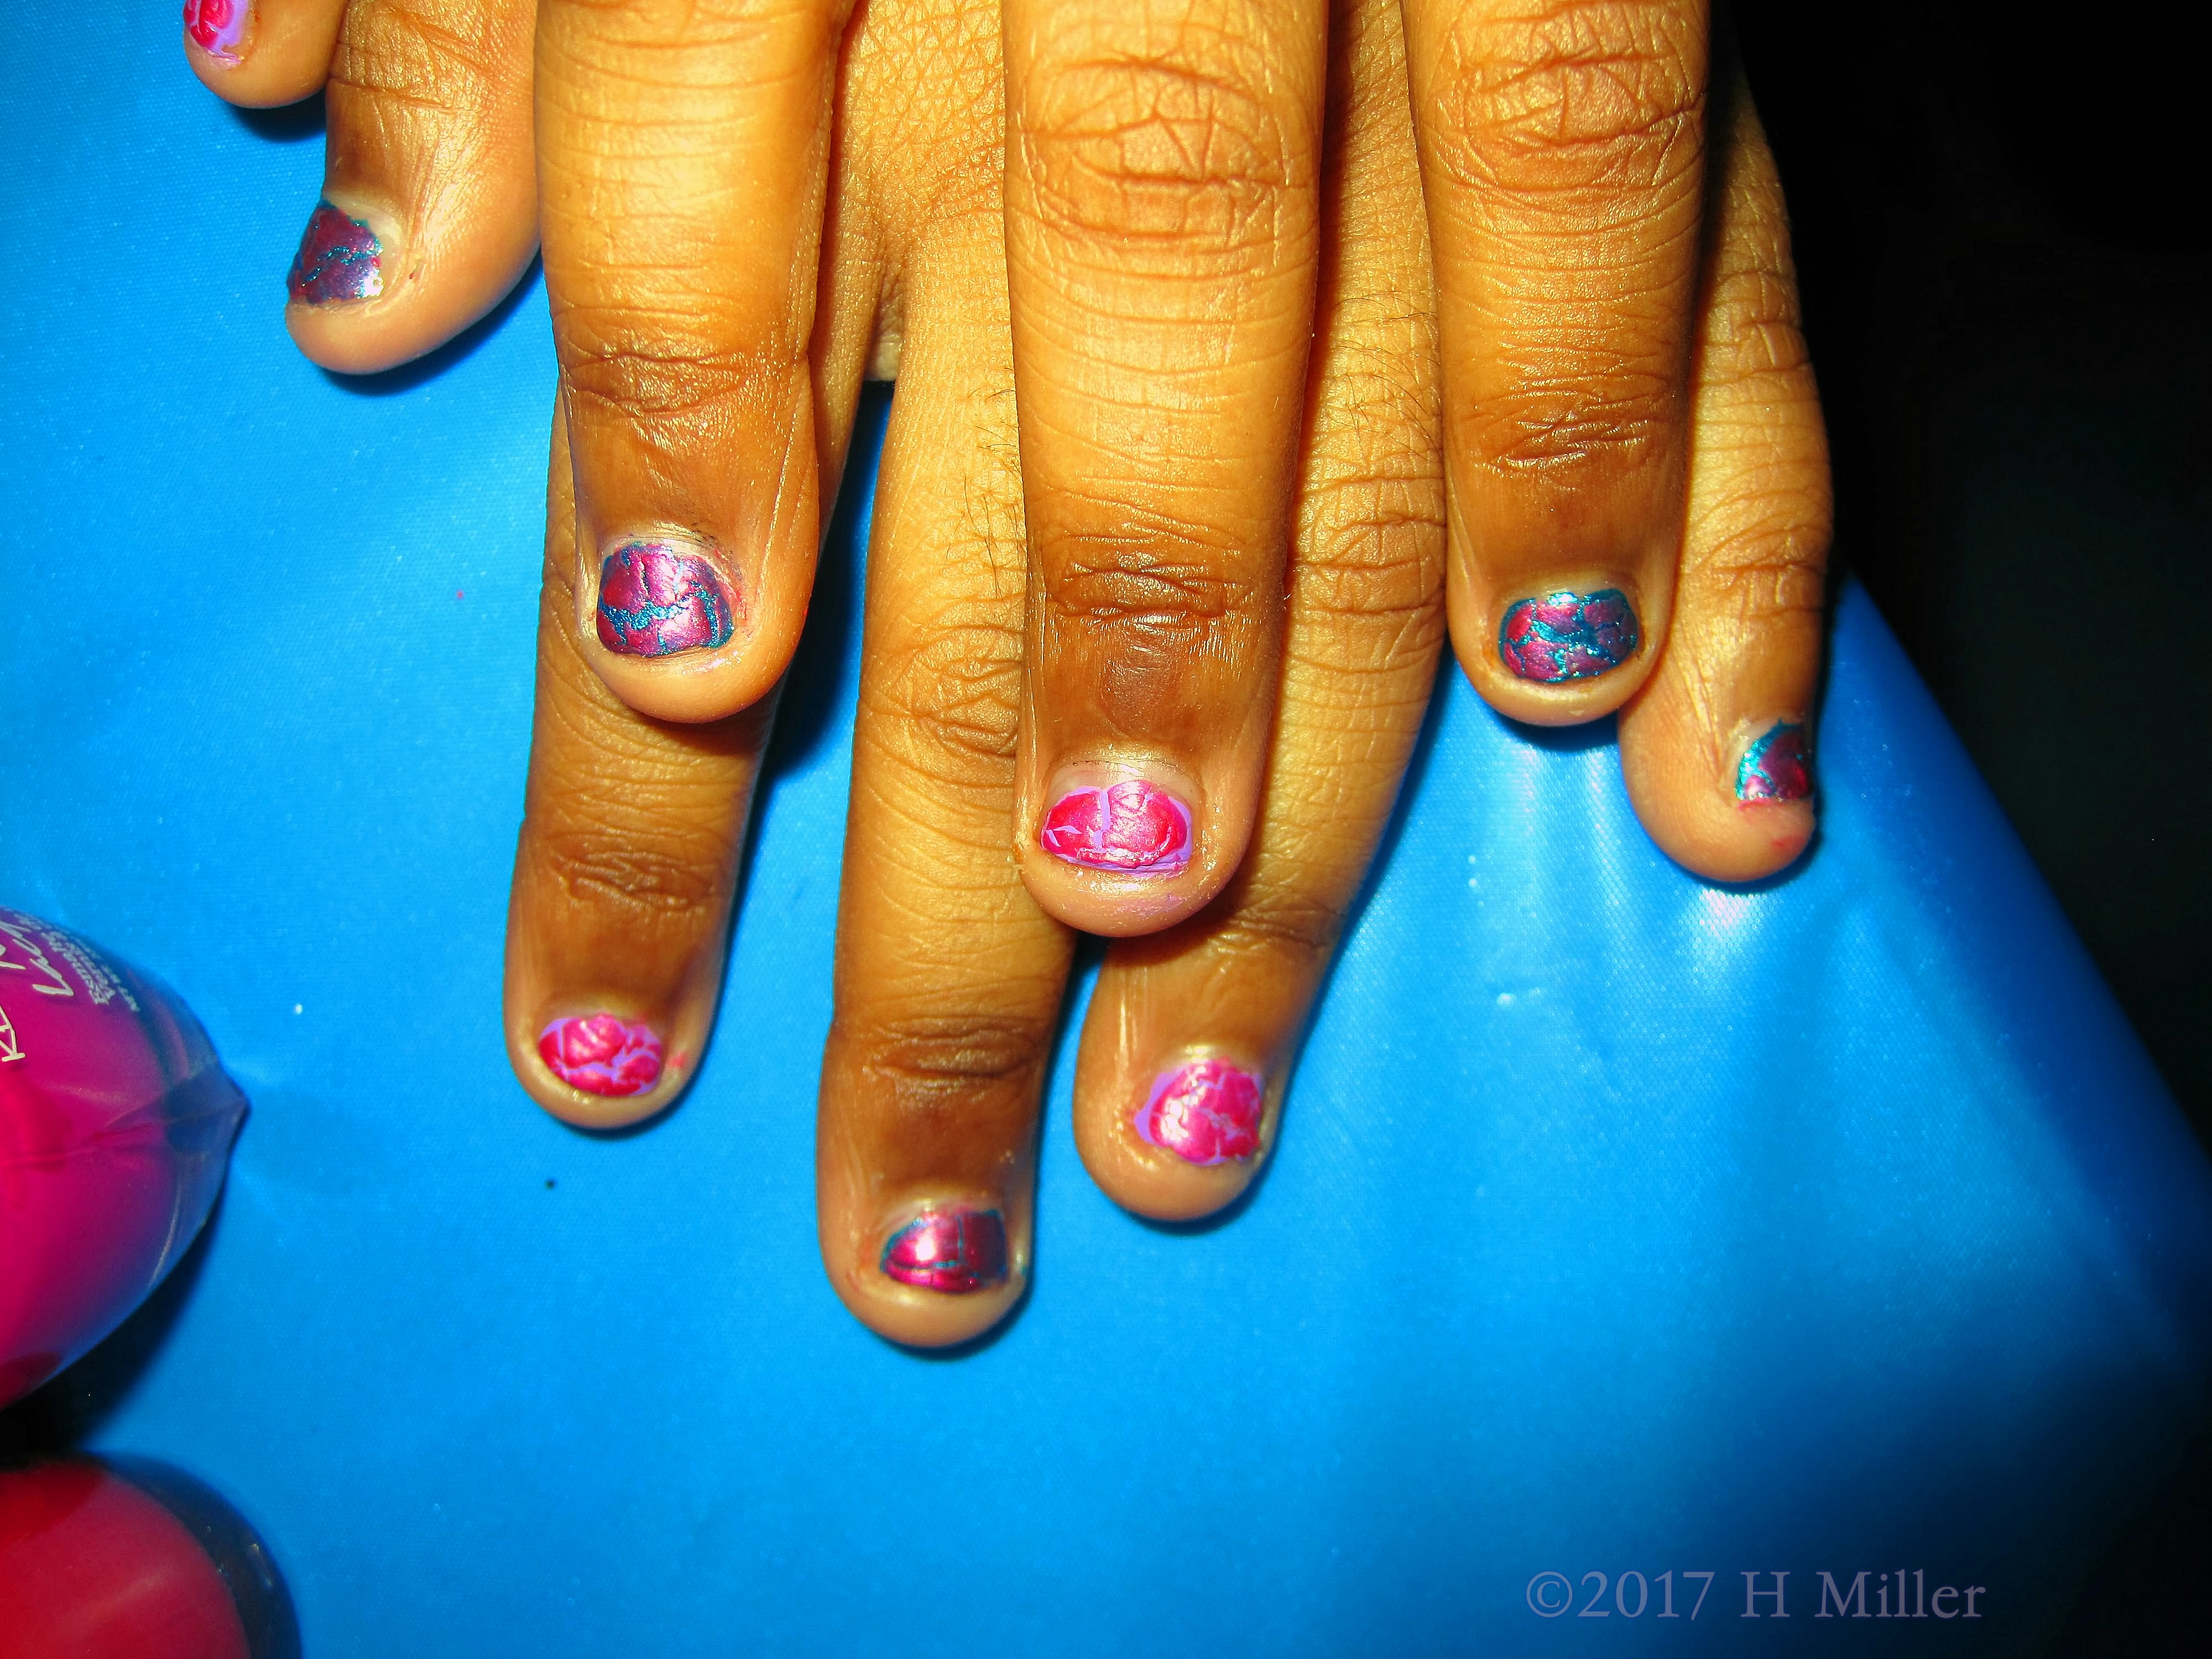 Alternating Pink And Purple Nail Polish For This Girls Manicure.